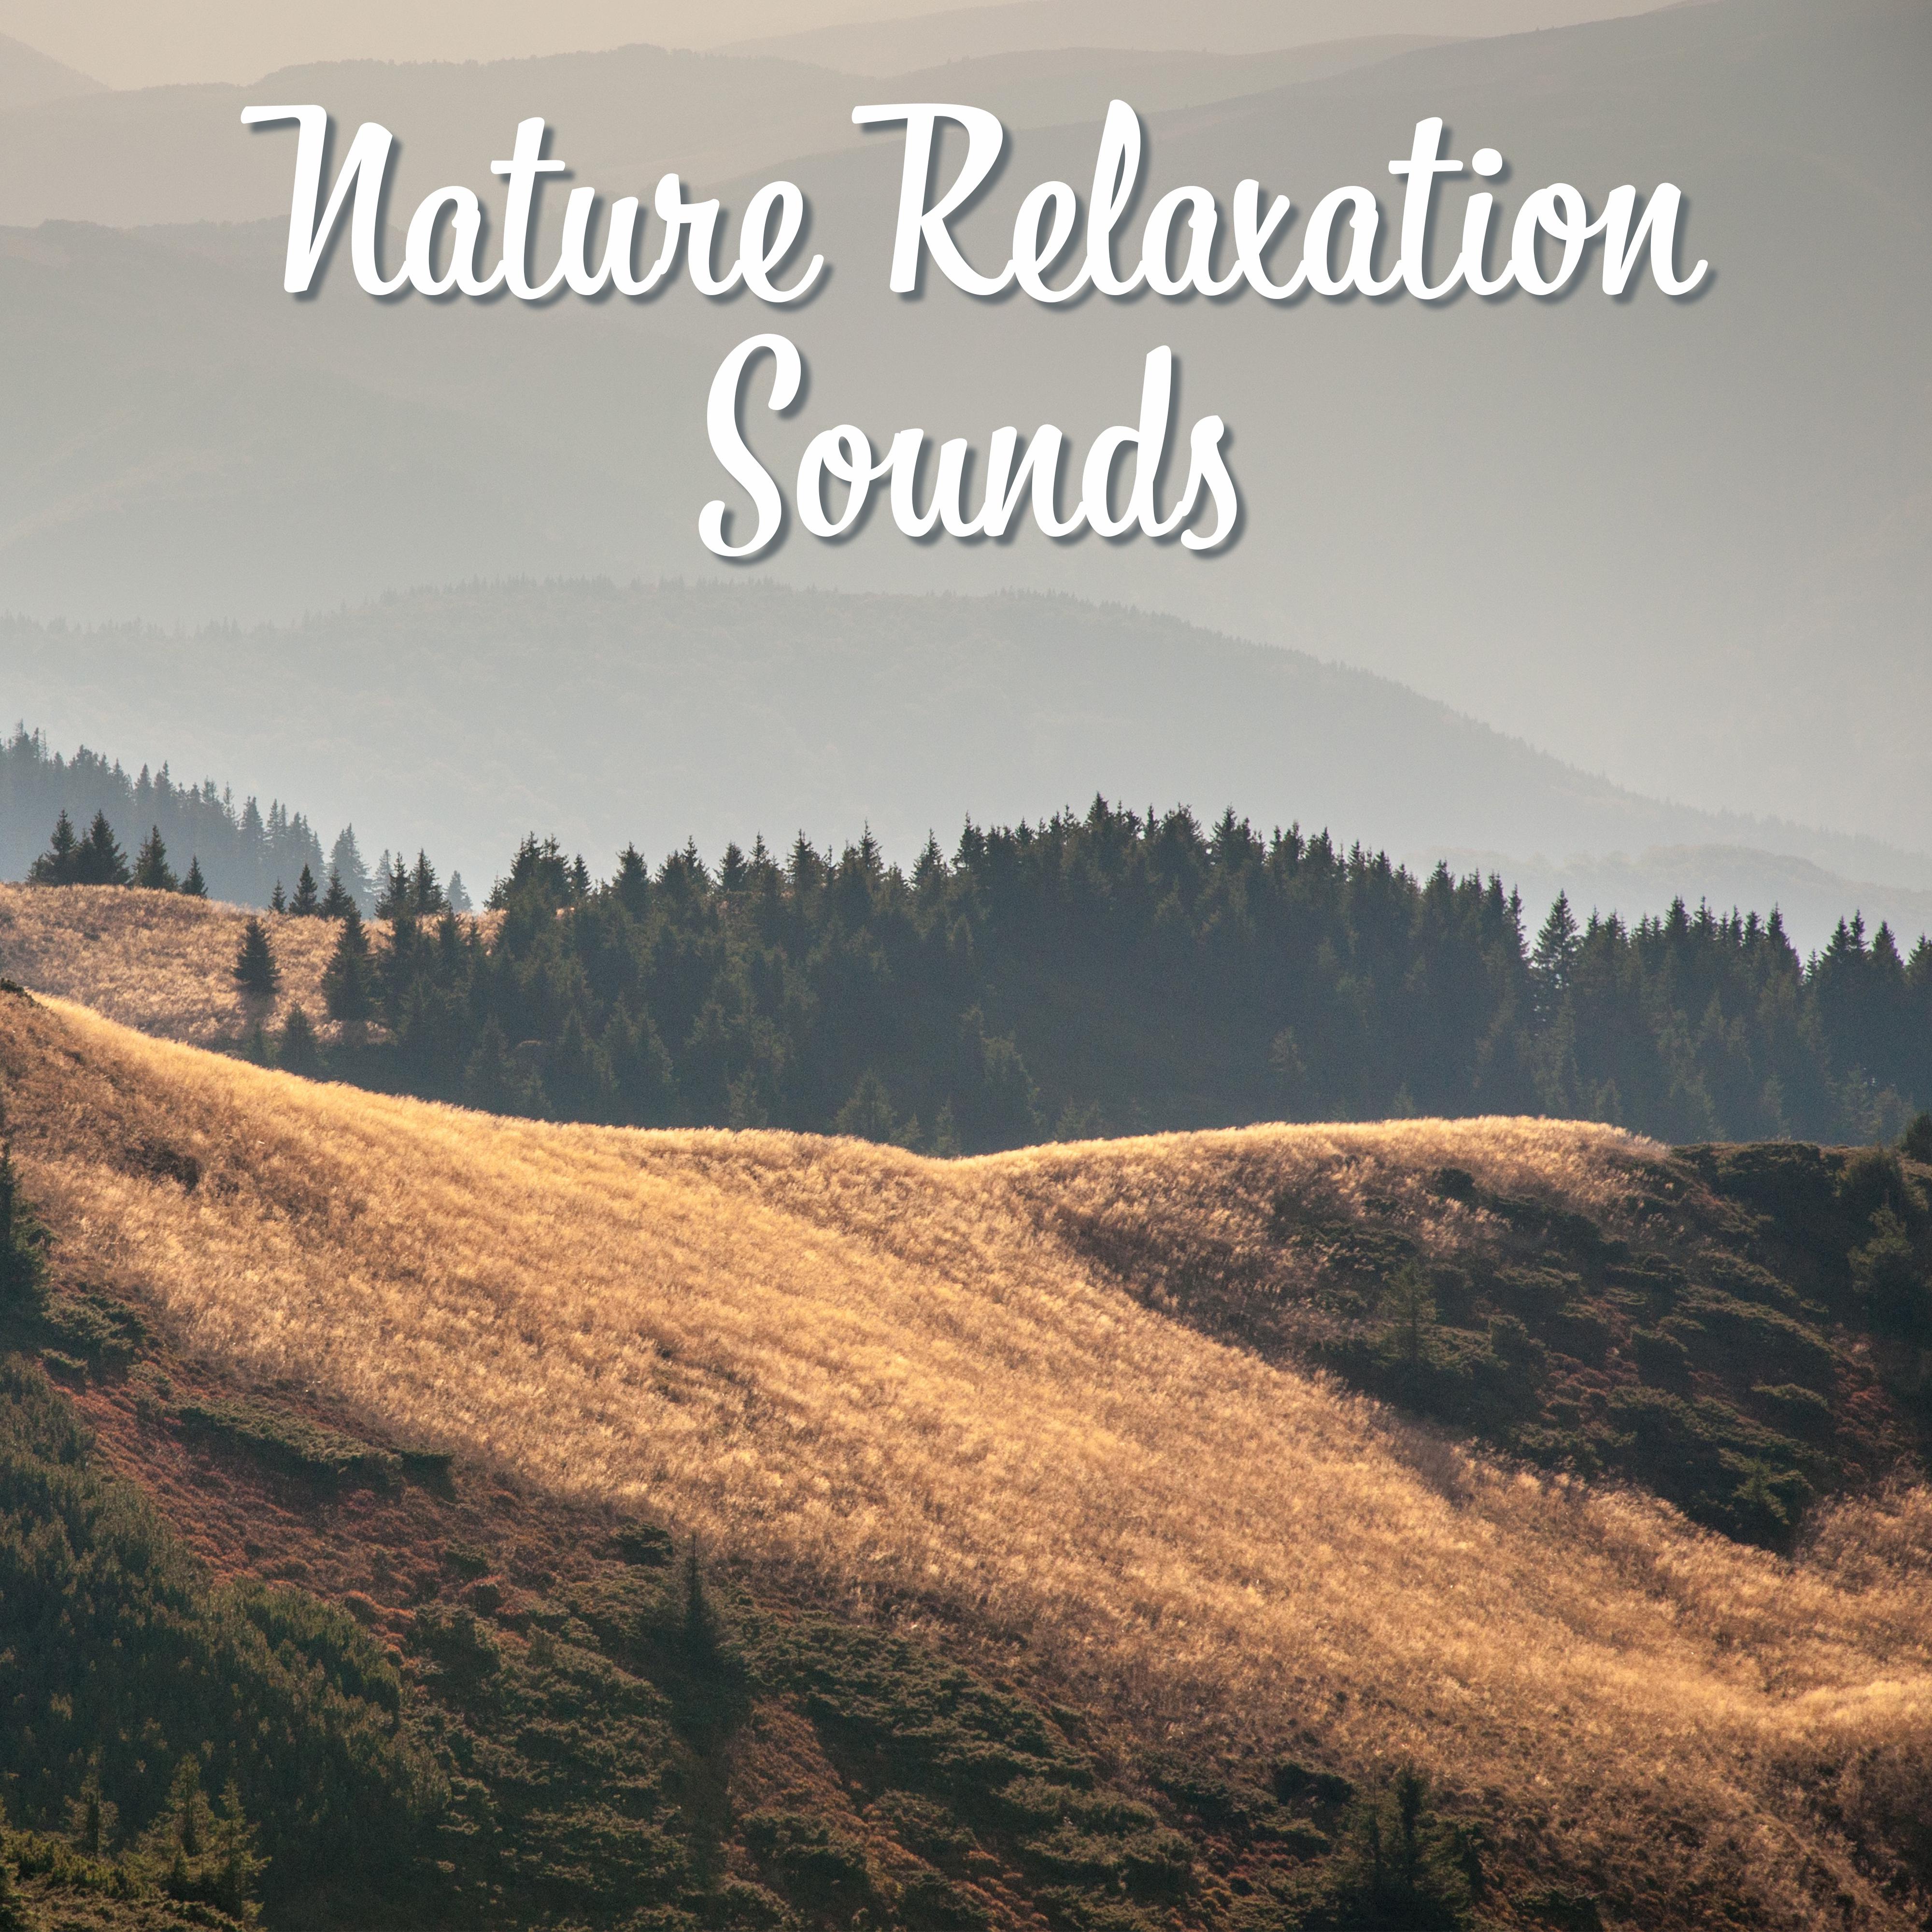 Nature Relaxation Sounds  Soothing New Age Music, Forest Waves, Calm Mind, Rest  Relax